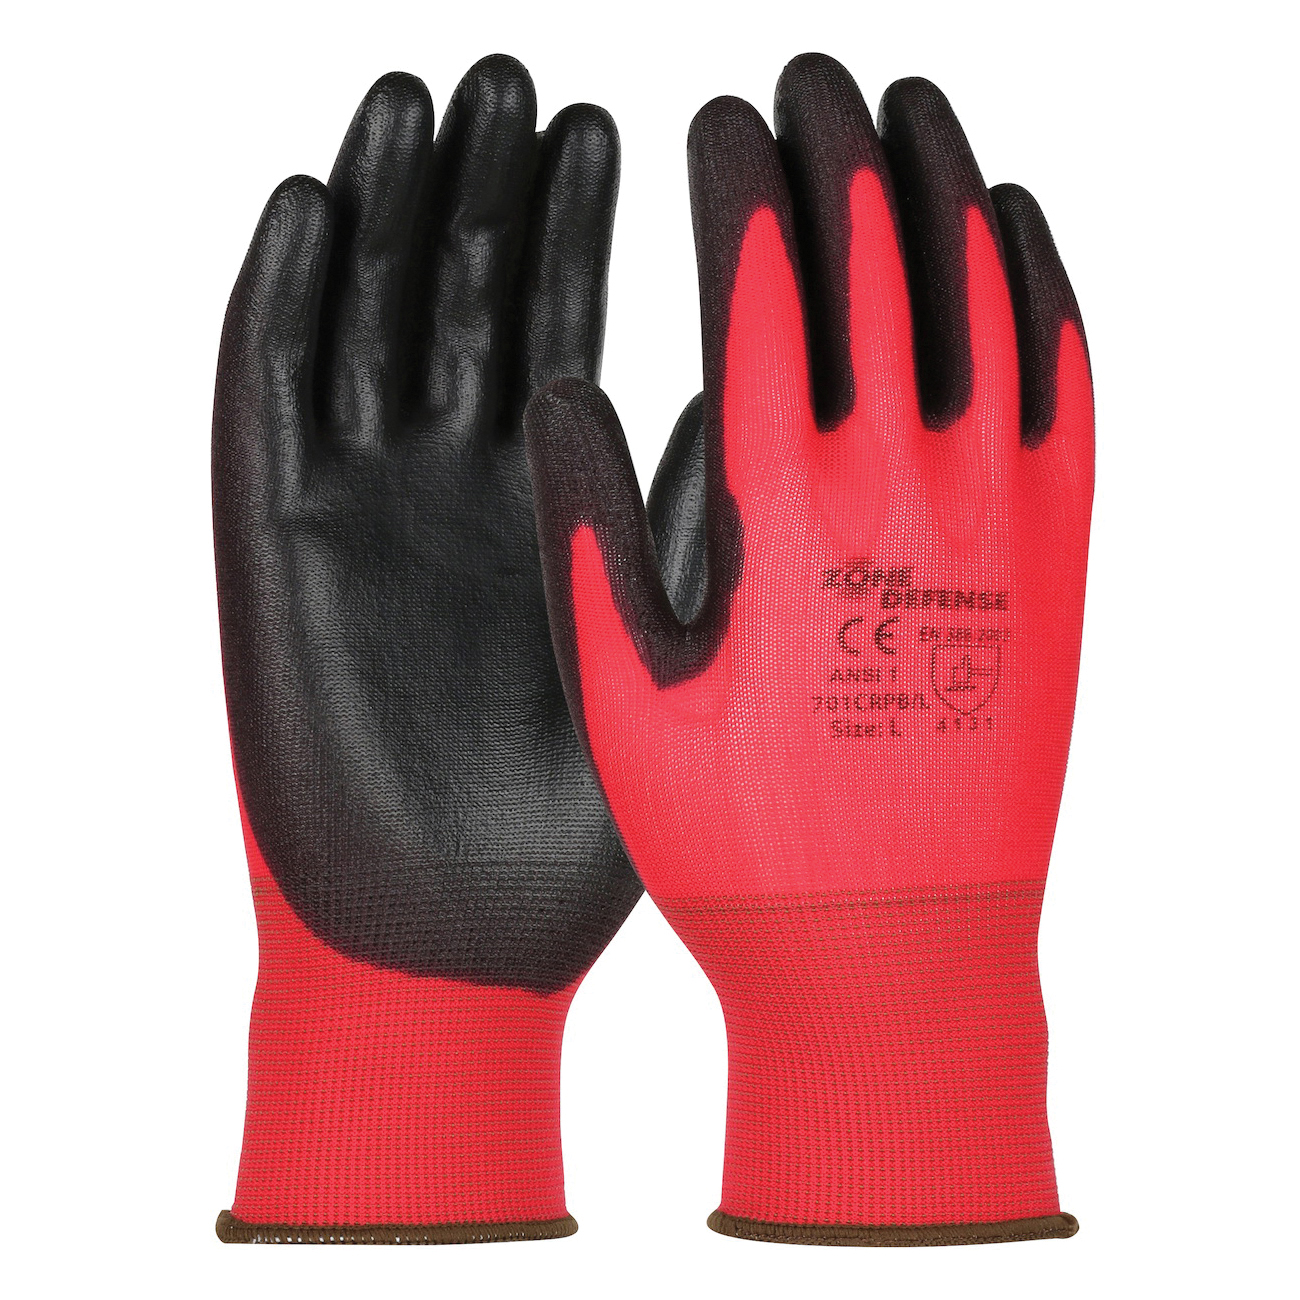 PIP® 701CRPB/S Unisex General Purpose Gloves, Coated/Work, Seamless Style, S, Polyurethane Palm, Nylon, Black/Red, Ribbed Knit Wrist Cuff, Polyurethane Coating, Resists: Cut and Puncture